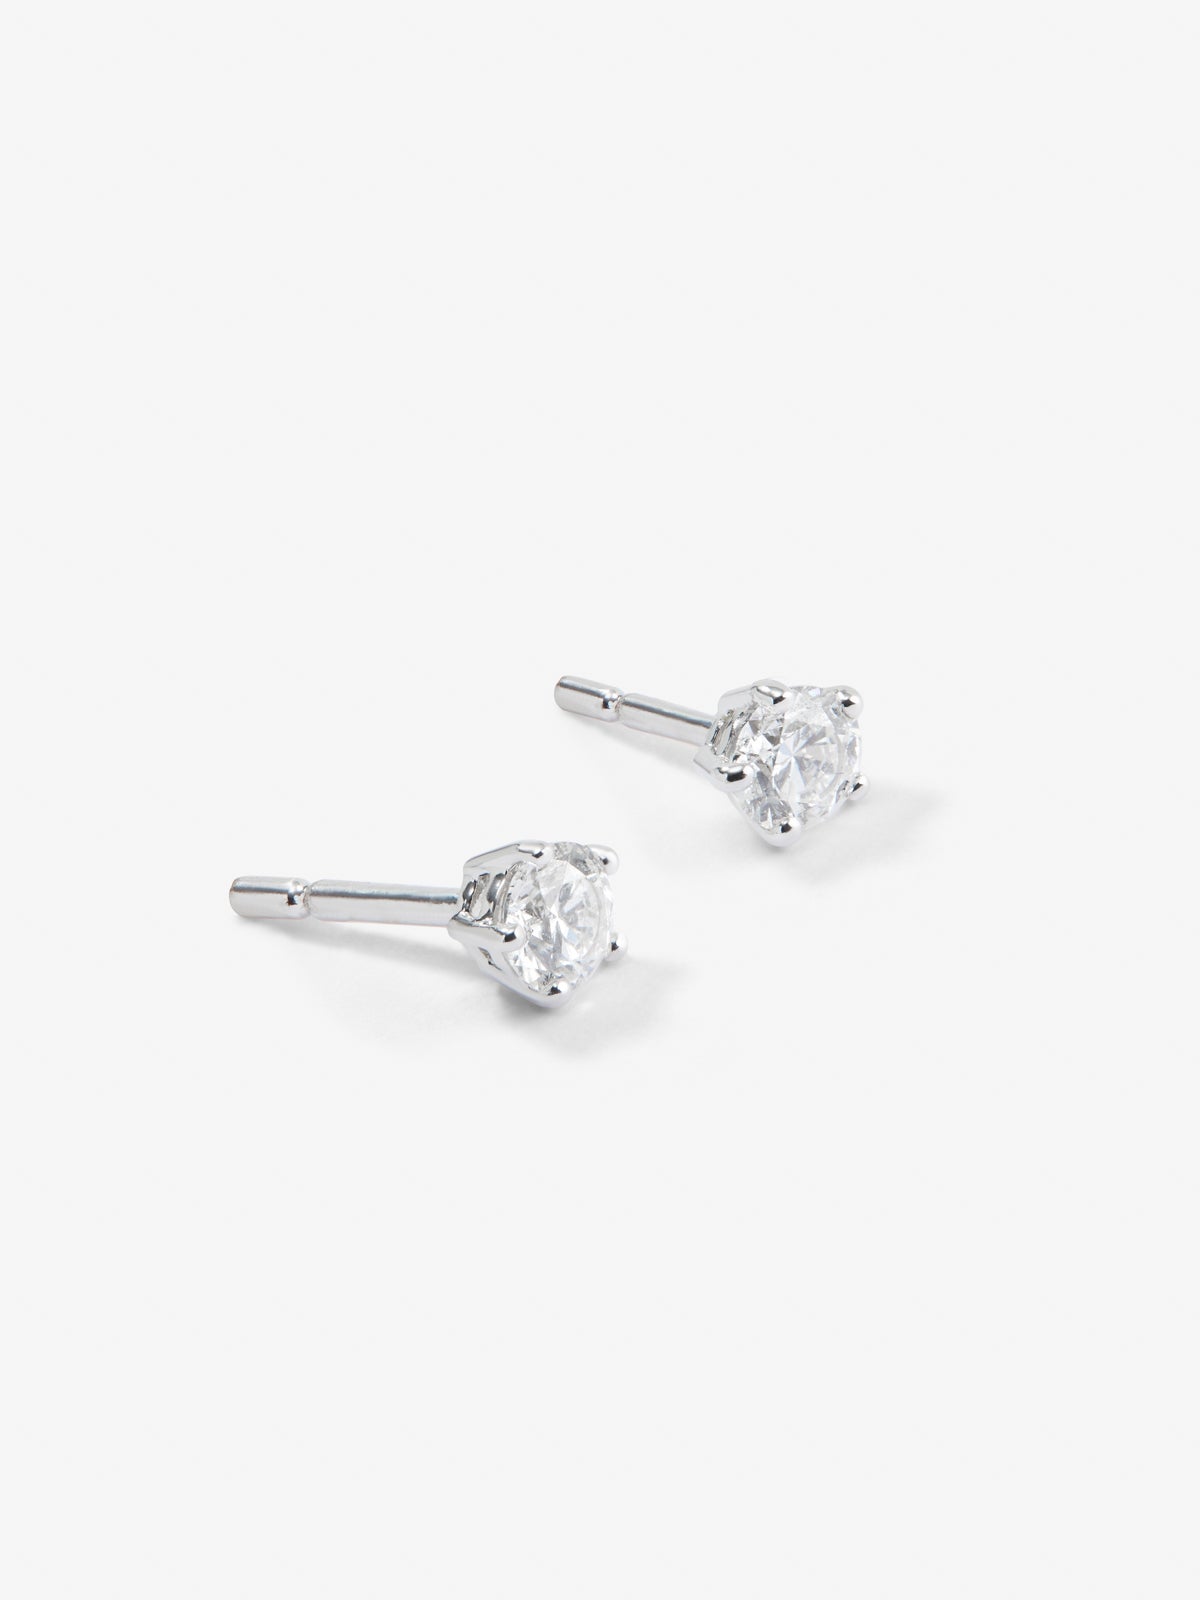 Solitary 18k White gold earrings with white diamonds